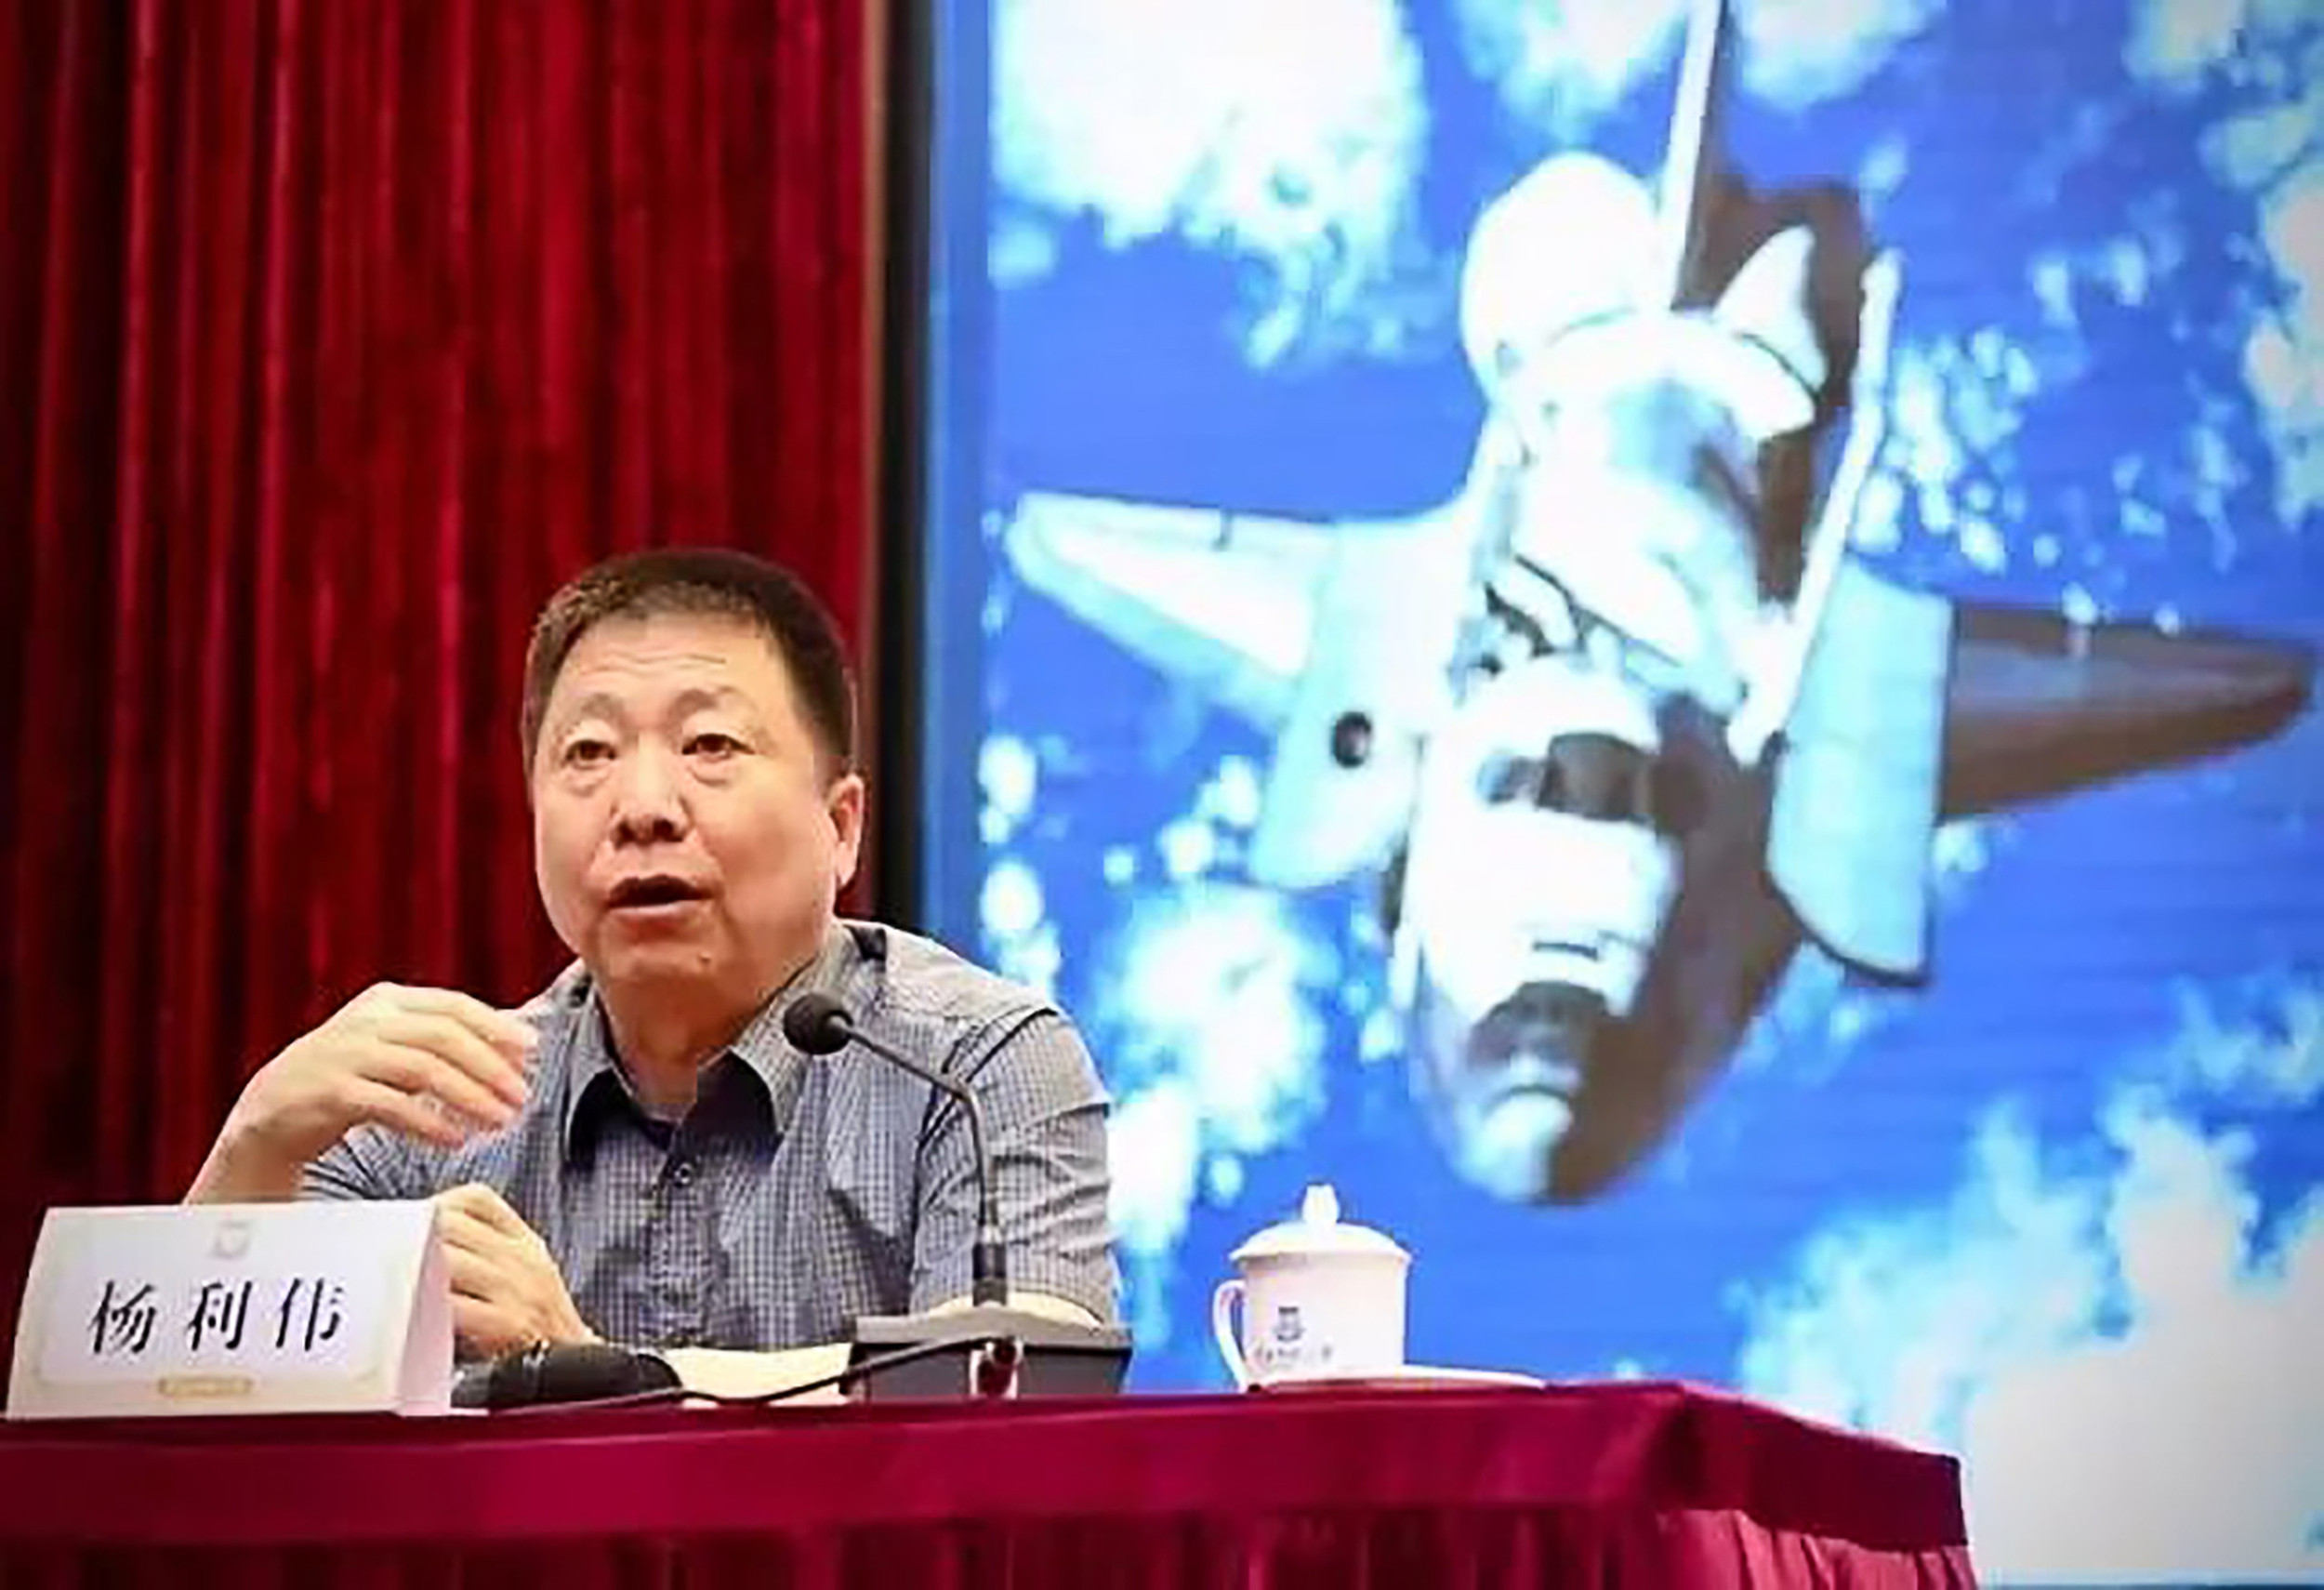 Yang Liwei said the new spacecraft would have a “critical role” in the space station and crewed moon landing mission. Photo: Weibo